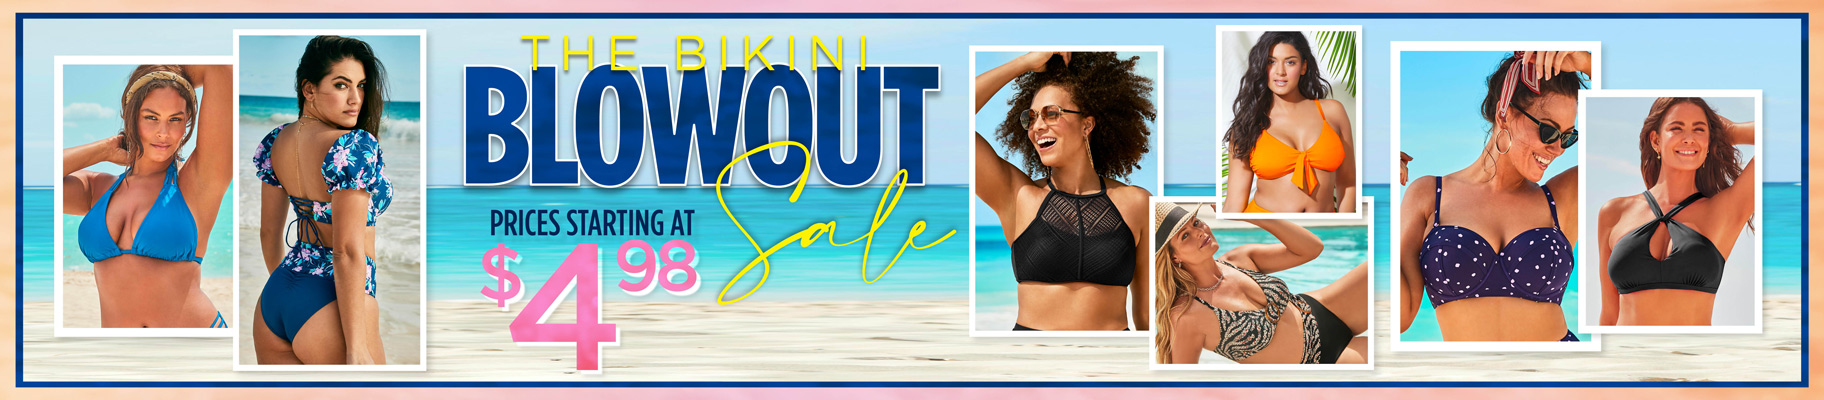 THE BIKINI BLOWOUT SALE! PRICES STARTING AT $4.98